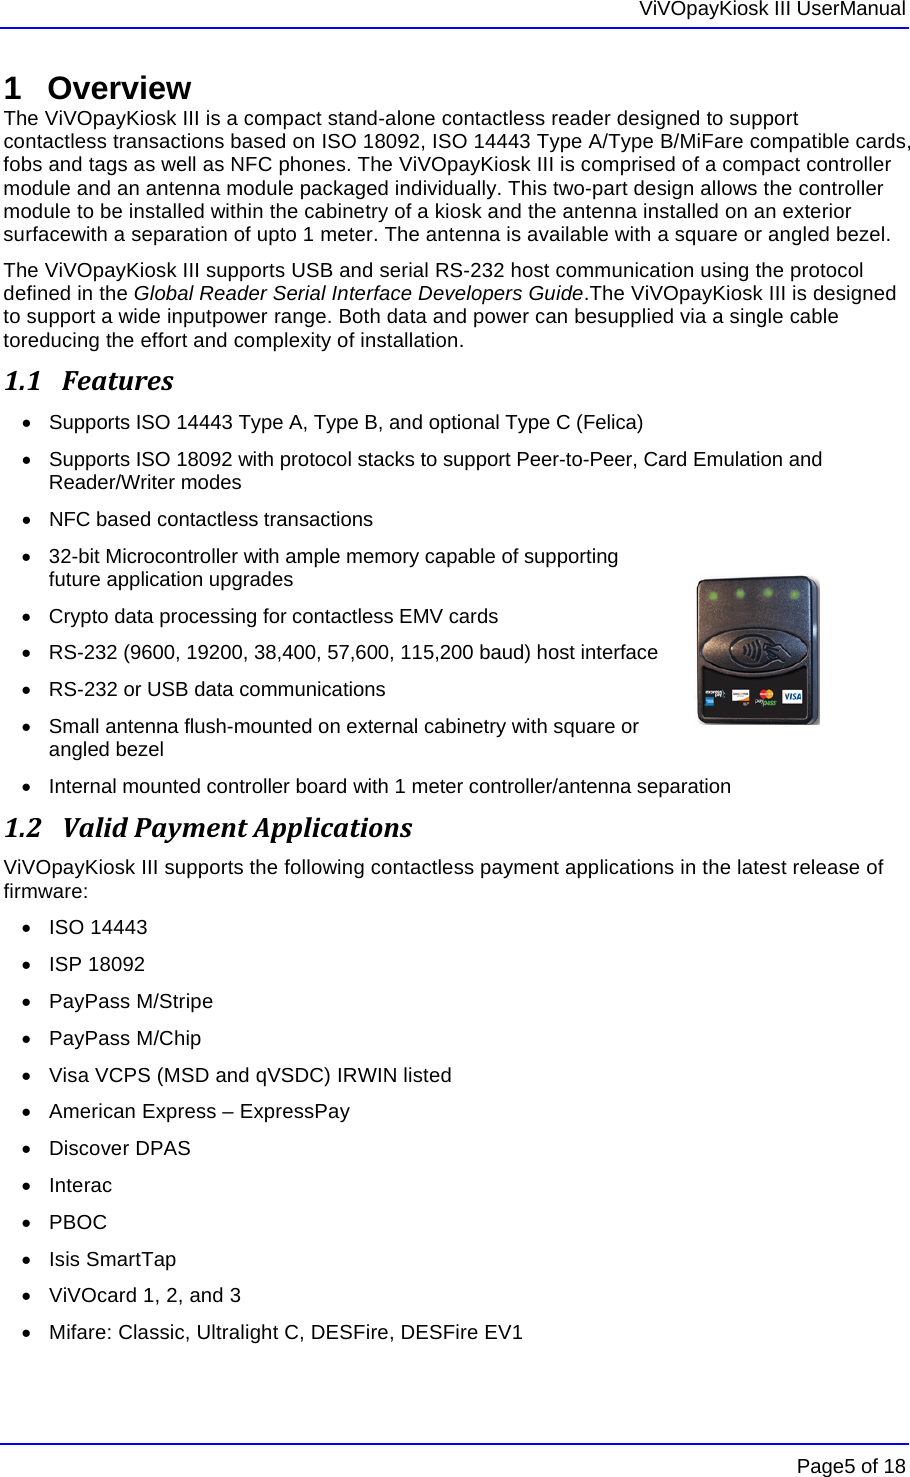   ViVOpayKiosk III UserManual      Page5 of 18 1 Overview The ViVOpayKiosk III is a compact stand-alone contactless reader designed to support contactless transactions based on ISO 18092, ISO 14443 Type A/Type B/MiFare compatible cards, fobs and tags as well as NFC phones. The ViVOpayKiosk III is comprised of a compact controller module and an antenna module packaged individually. This two-part design allows the controller module to be installed within the cabinetry of a kiosk and the antenna installed on an exterior surfacewith a separation of upto 1 meter. The antenna is available with a square or angled bezel.  The ViVOpayKiosk III supports USB and serial RS-232 host communication using the protocol defined in the Global Reader Serial Interface Developers Guide.The ViVOpayKiosk III is designed to support a wide inputpower range. Both data and power can besupplied via a single cable toreducing the effort and complexity of installation. 1.1 Features•  Supports ISO 14443 Type A, Type B, and optional Type C (Felica) •  Supports ISO 18092 with protocol stacks to support Peer-to-Peer, Card Emulation and Reader/Writer modes •  NFC based contactless transactions  •  32-bit Microcontroller with ample memory capable of supporting future application upgrades •  Crypto data processing for contactless EMV cards  •  RS-232 (9600, 19200, 38,400, 57,600, 115,200 baud) host interface •  RS-232 or USB data communications •  Small antenna flush-mounted on external cabinetry with square or angled bezel •  Internal mounted controller board with 1 meter controller/antenna separation 1.2 ValidPaymentApplicationsViVOpayKiosk III supports the following contactless payment applications in the latest release of firmware:  • ISO 14443 • ISP 18092 • PayPass M/Stripe • PayPass M/Chip •  Visa VCPS (MSD and qVSDC) IRWIN listed •  American Express – ExpressPay • Discover DPAS • Interac • PBOC • Isis SmartTap •  ViVOcard 1, 2, and 3 •  Mifare: Classic, Ultralight C, DESFire, DESFire EV1 